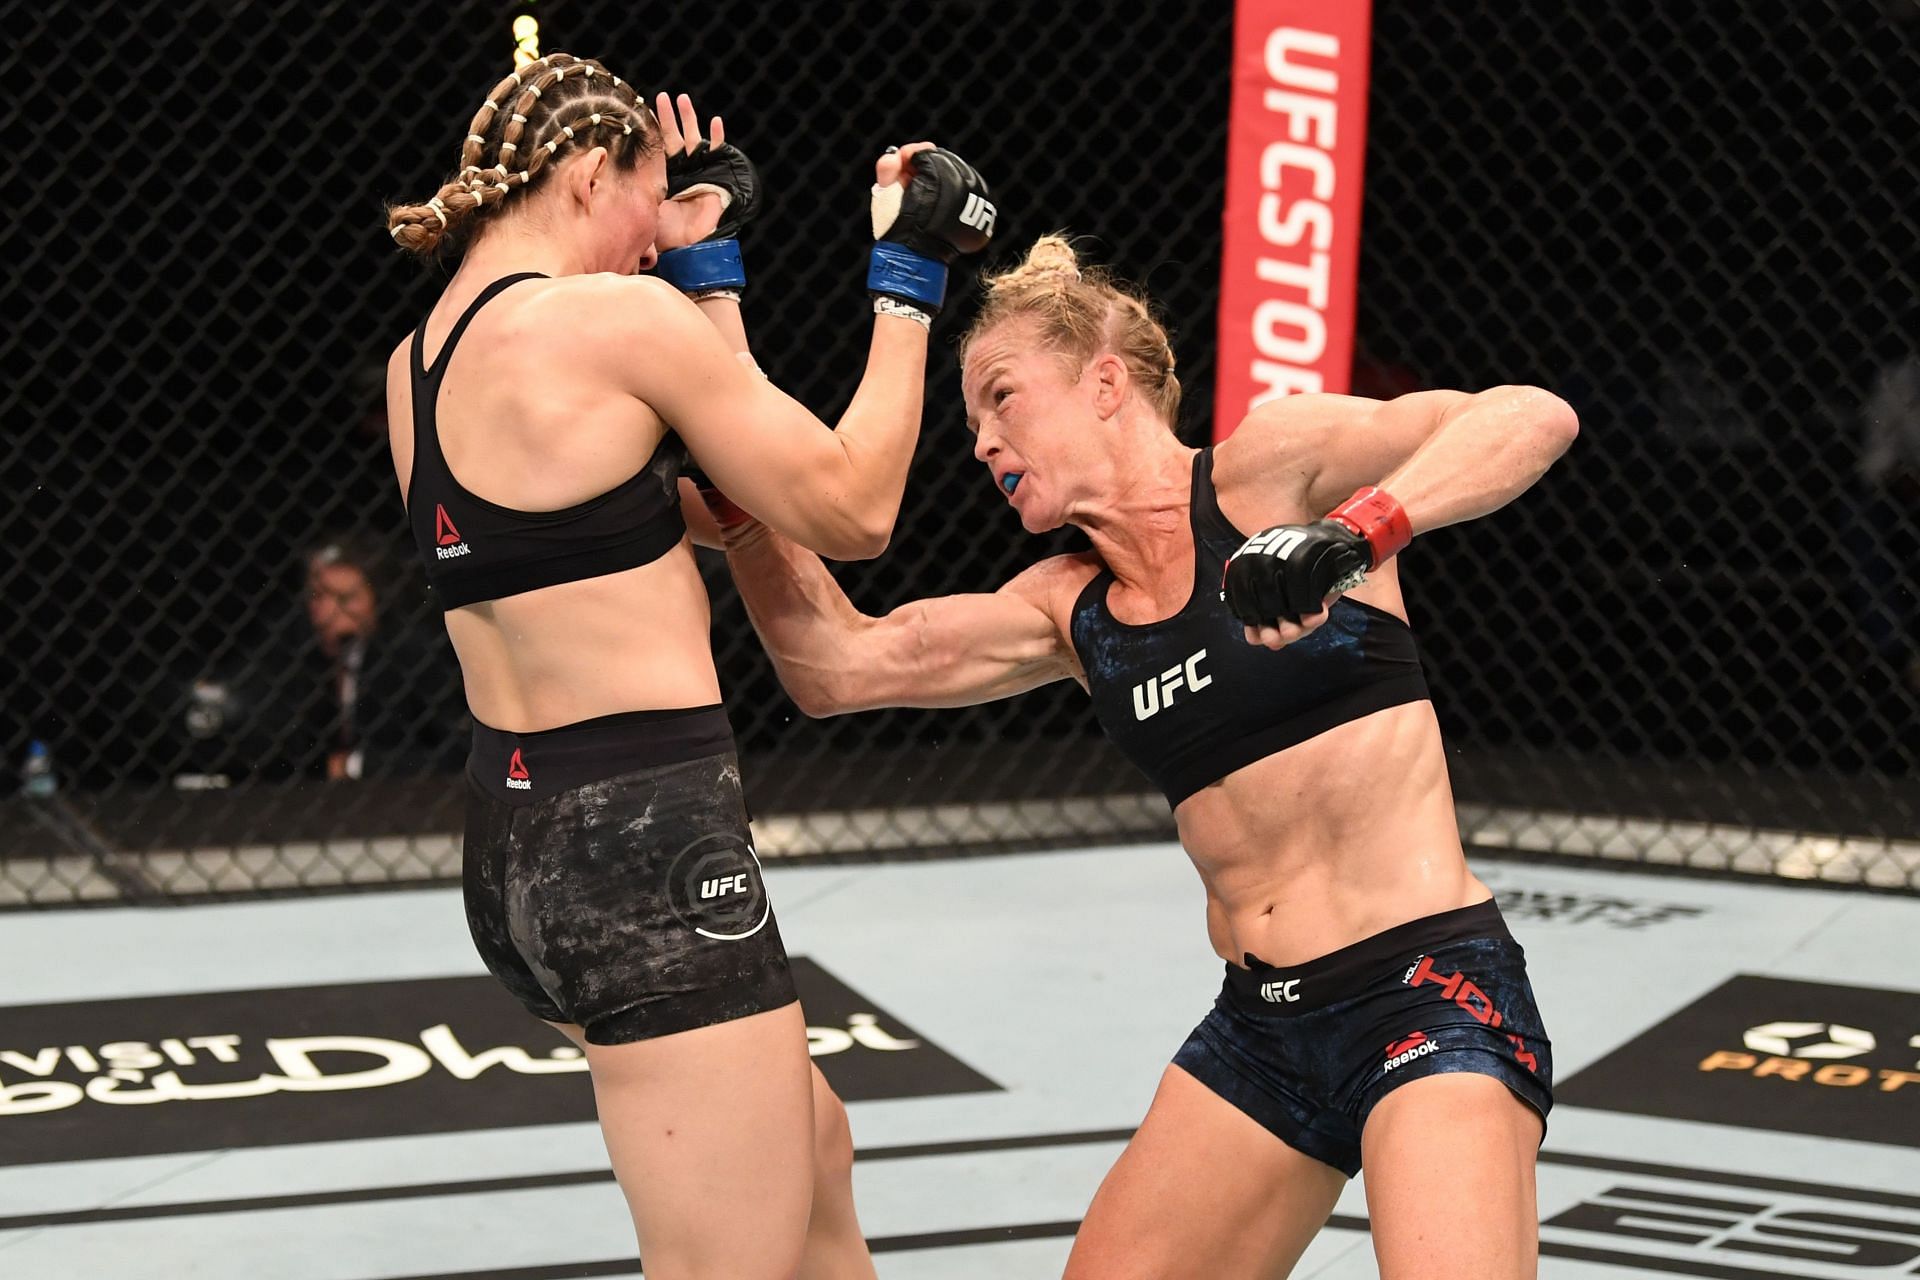 Despite her famous knockout of Ronda Rousey, Holly Holm has found it difficult to get a finish